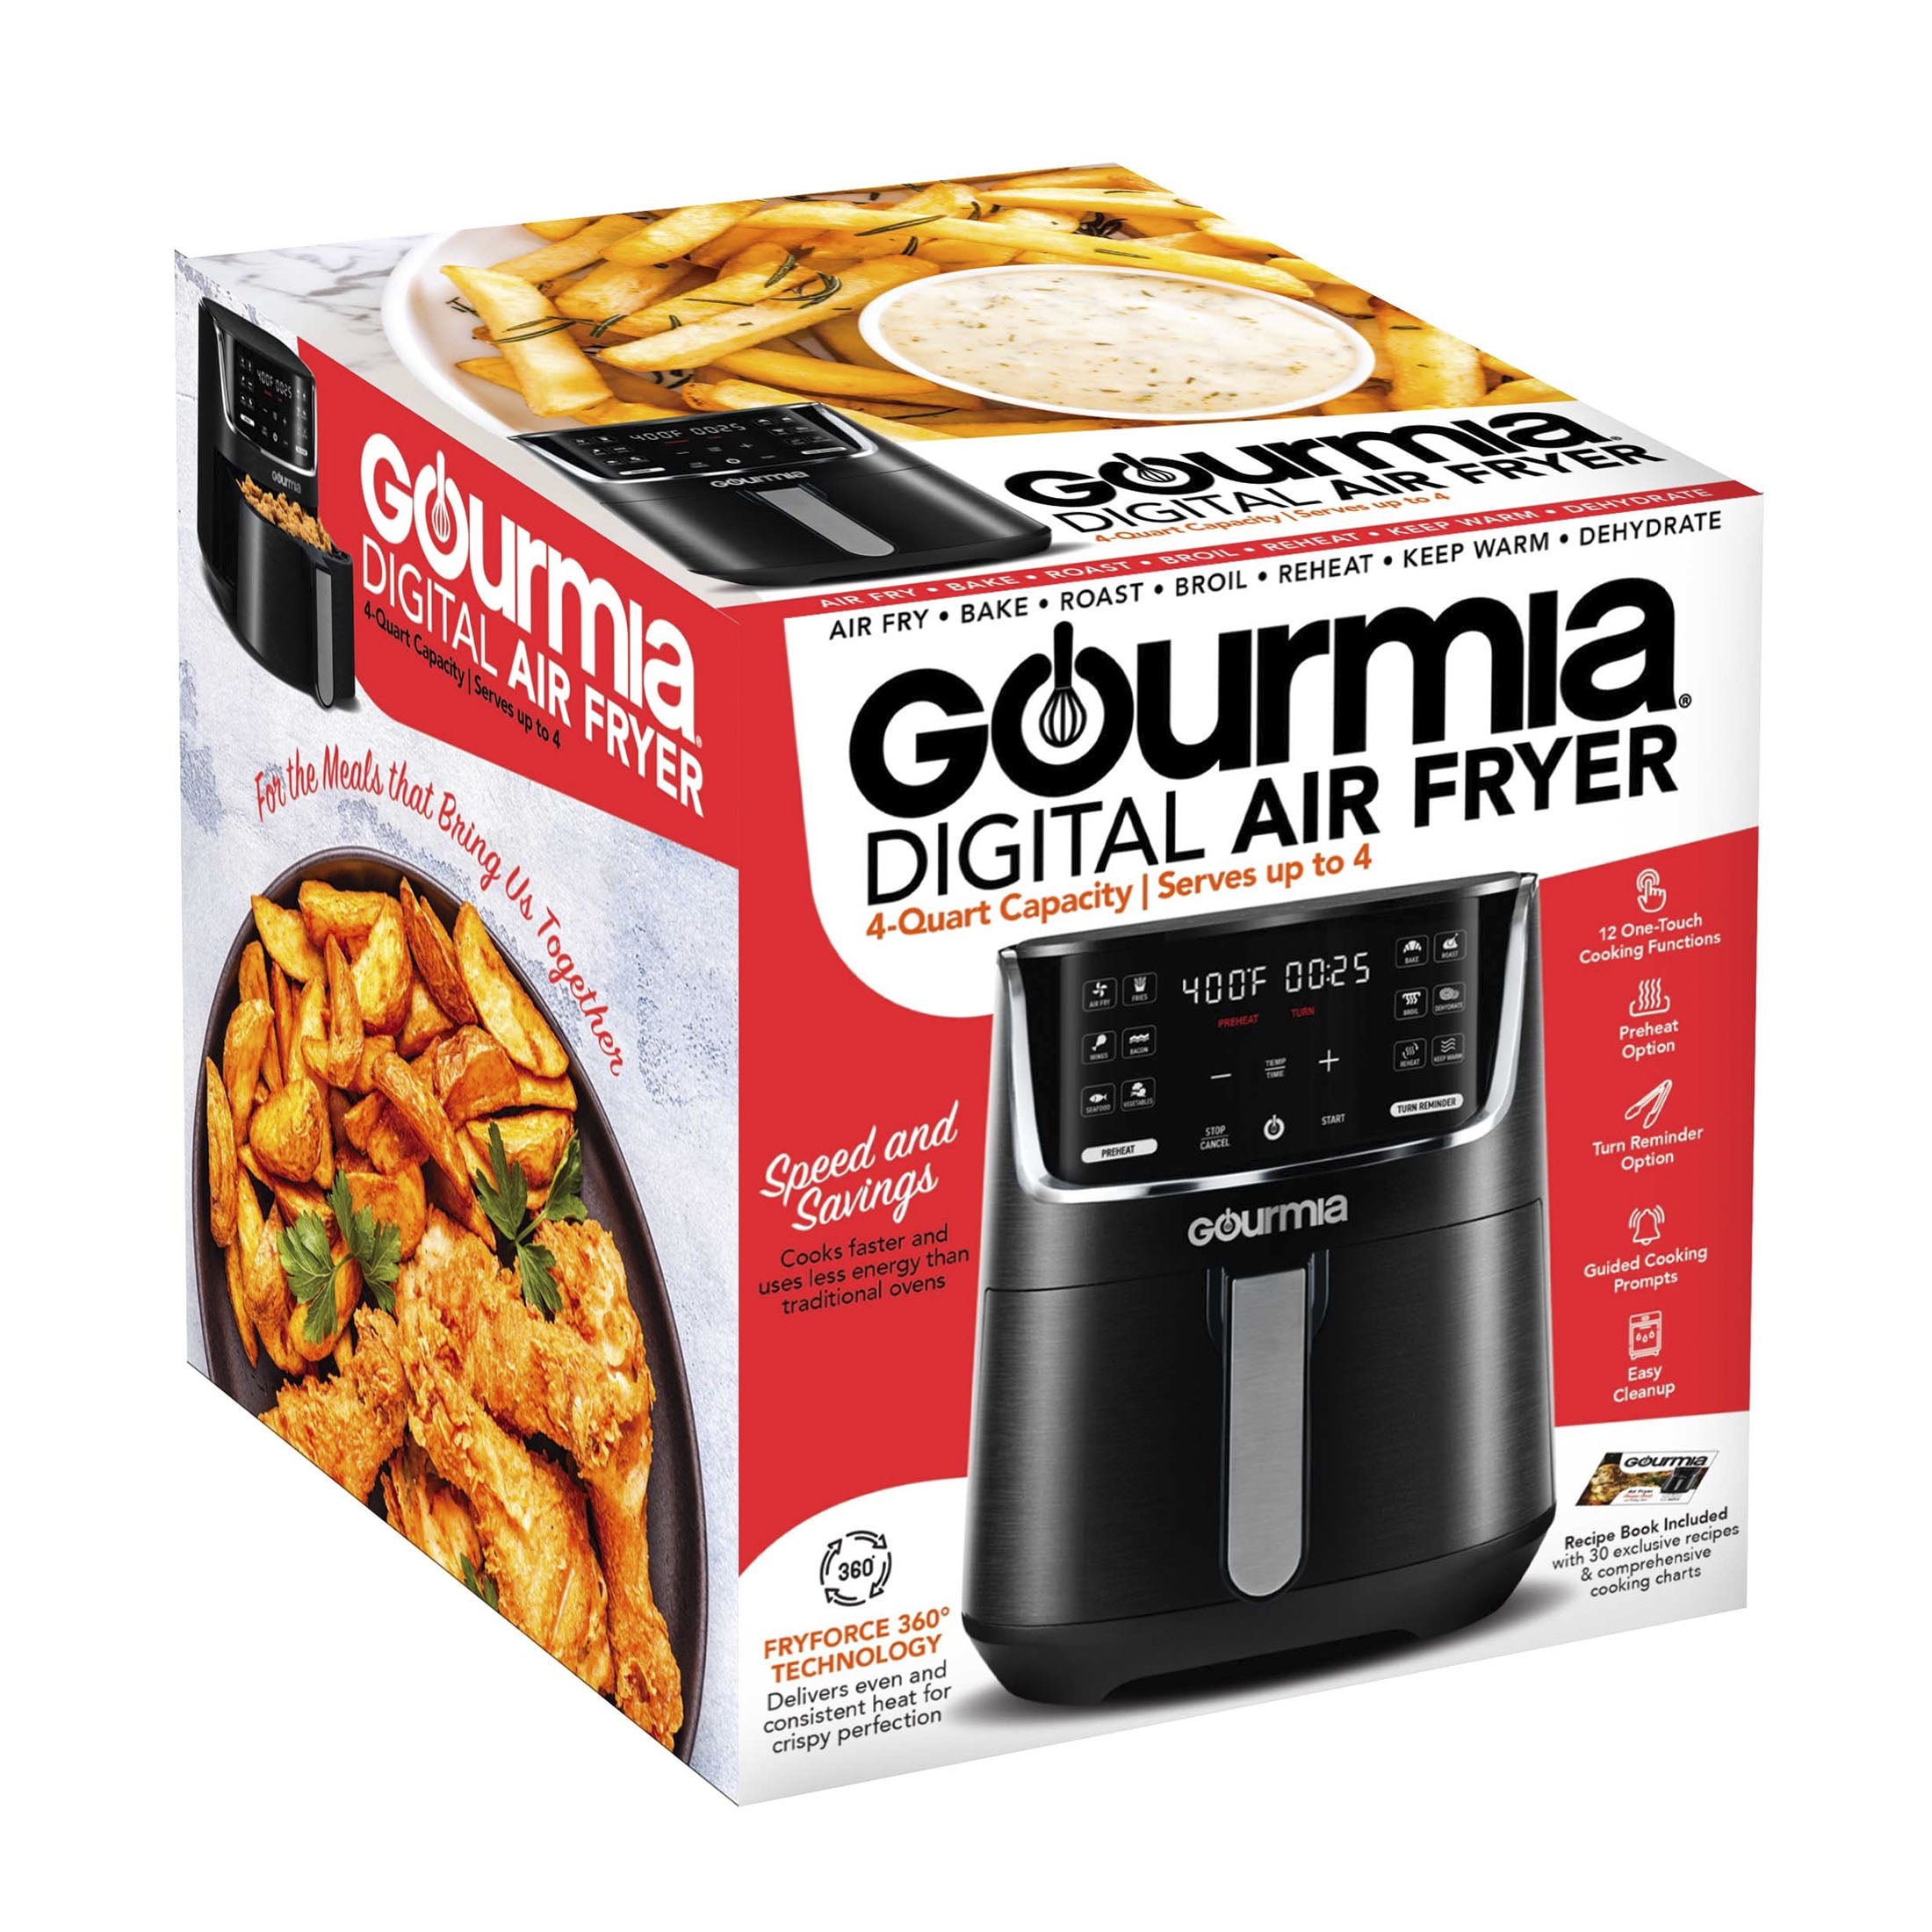  Gourmia 4-Qt Digital Air Fryer with Guided Cooking